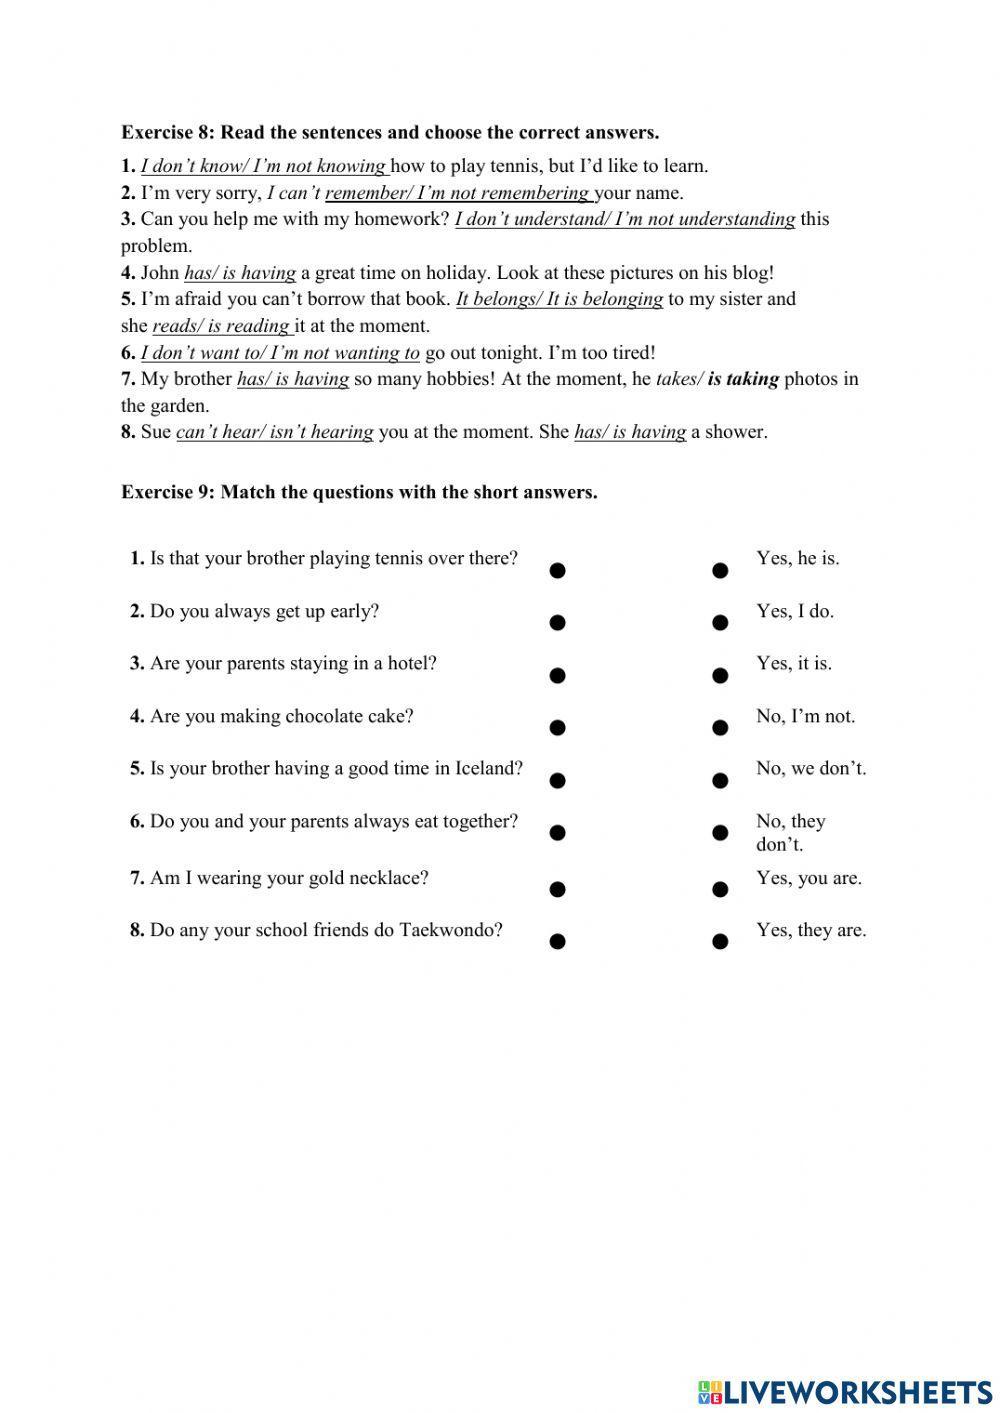 Unit 3 Hobbies,Leisure and Entertainment-Page 1-5